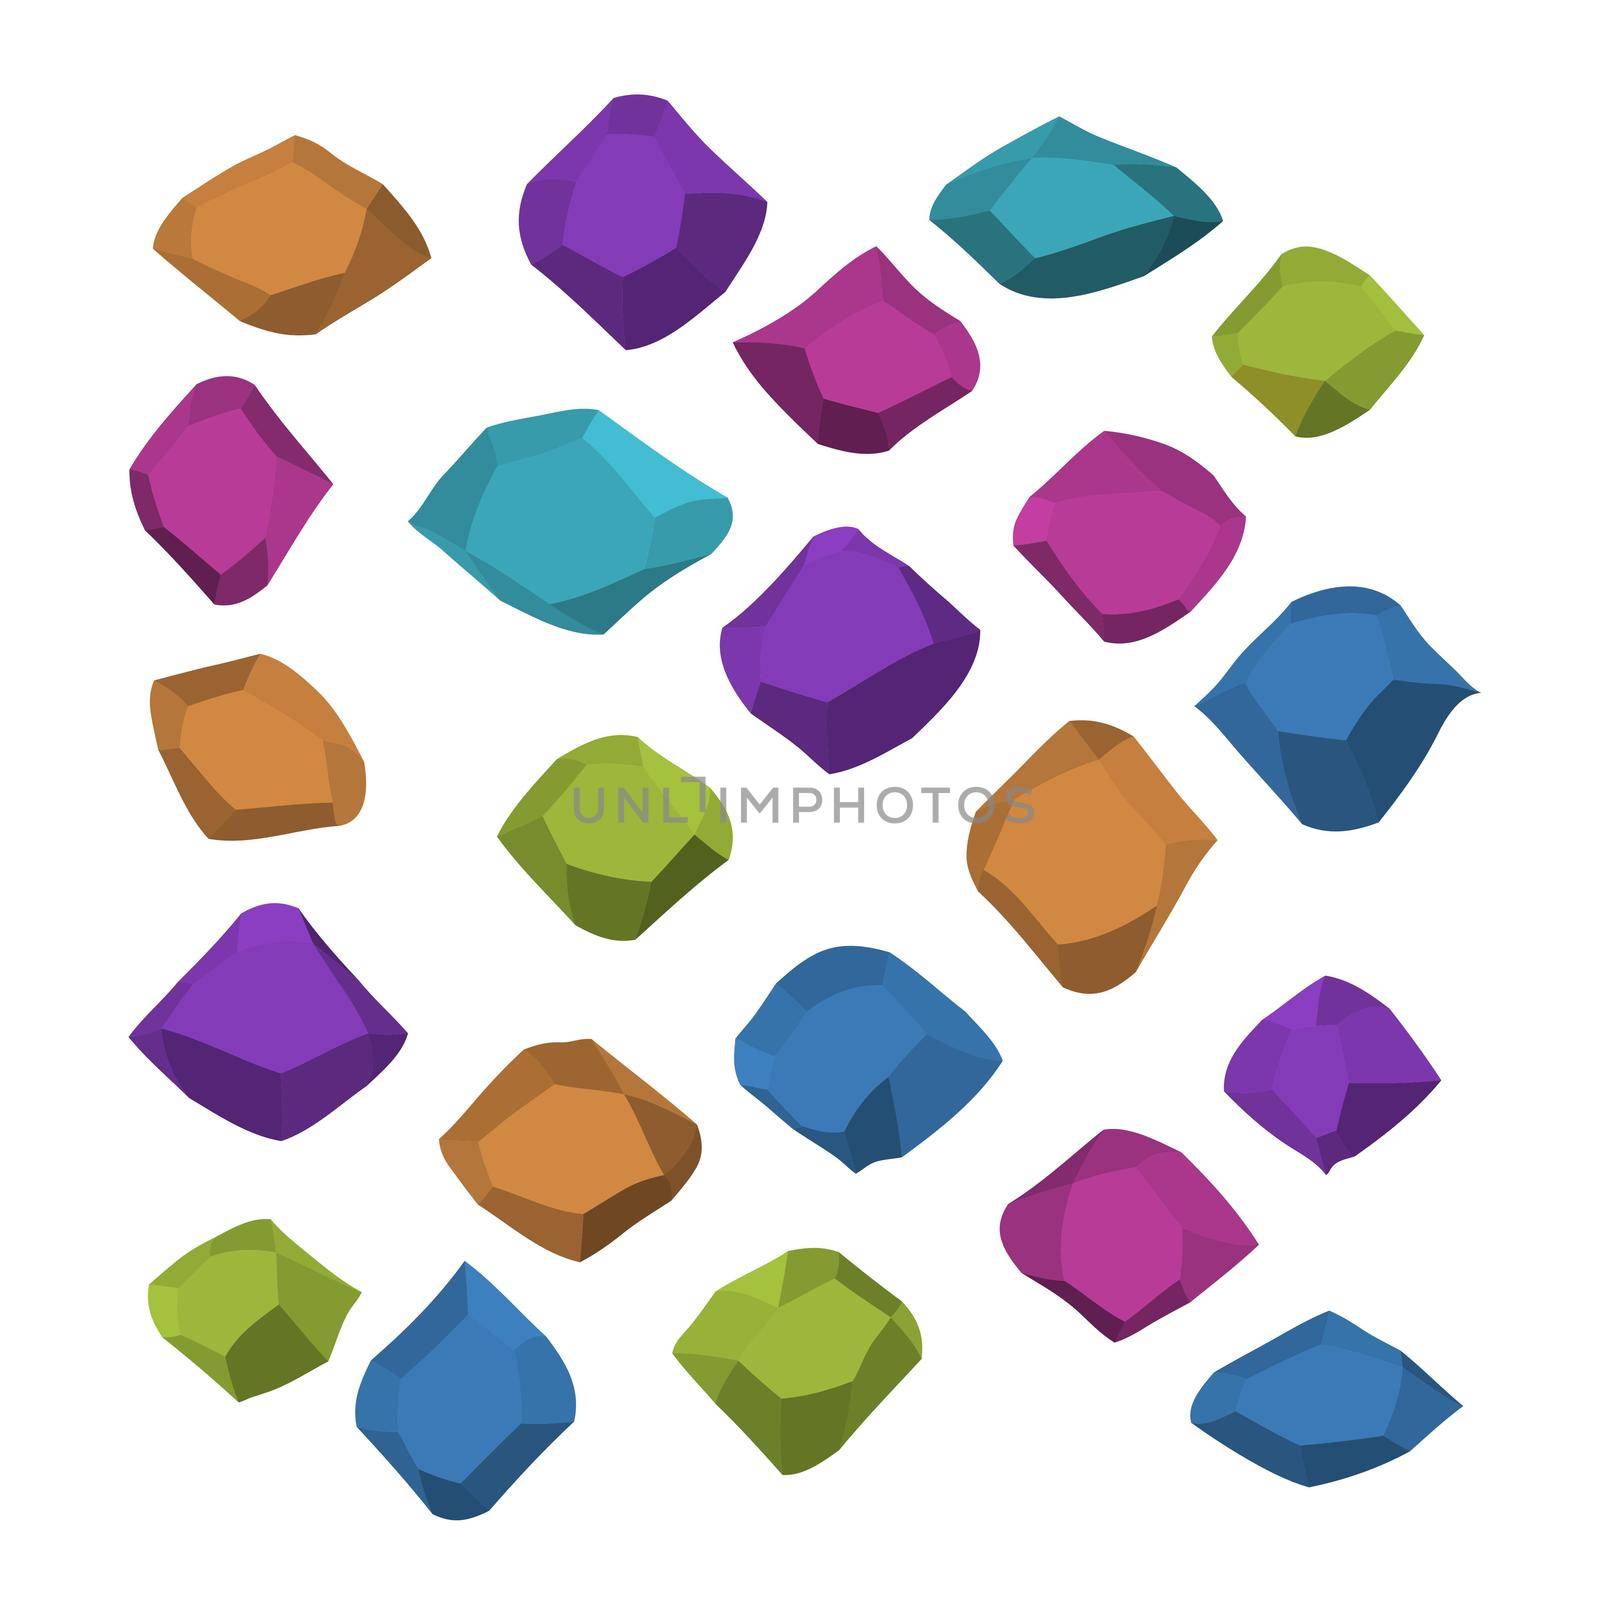 Cartoon stones. Rock stone isometric set. Colorful boulders, natural building block shapes, wall stones. 3d flat isolated illustration. Vector collection.